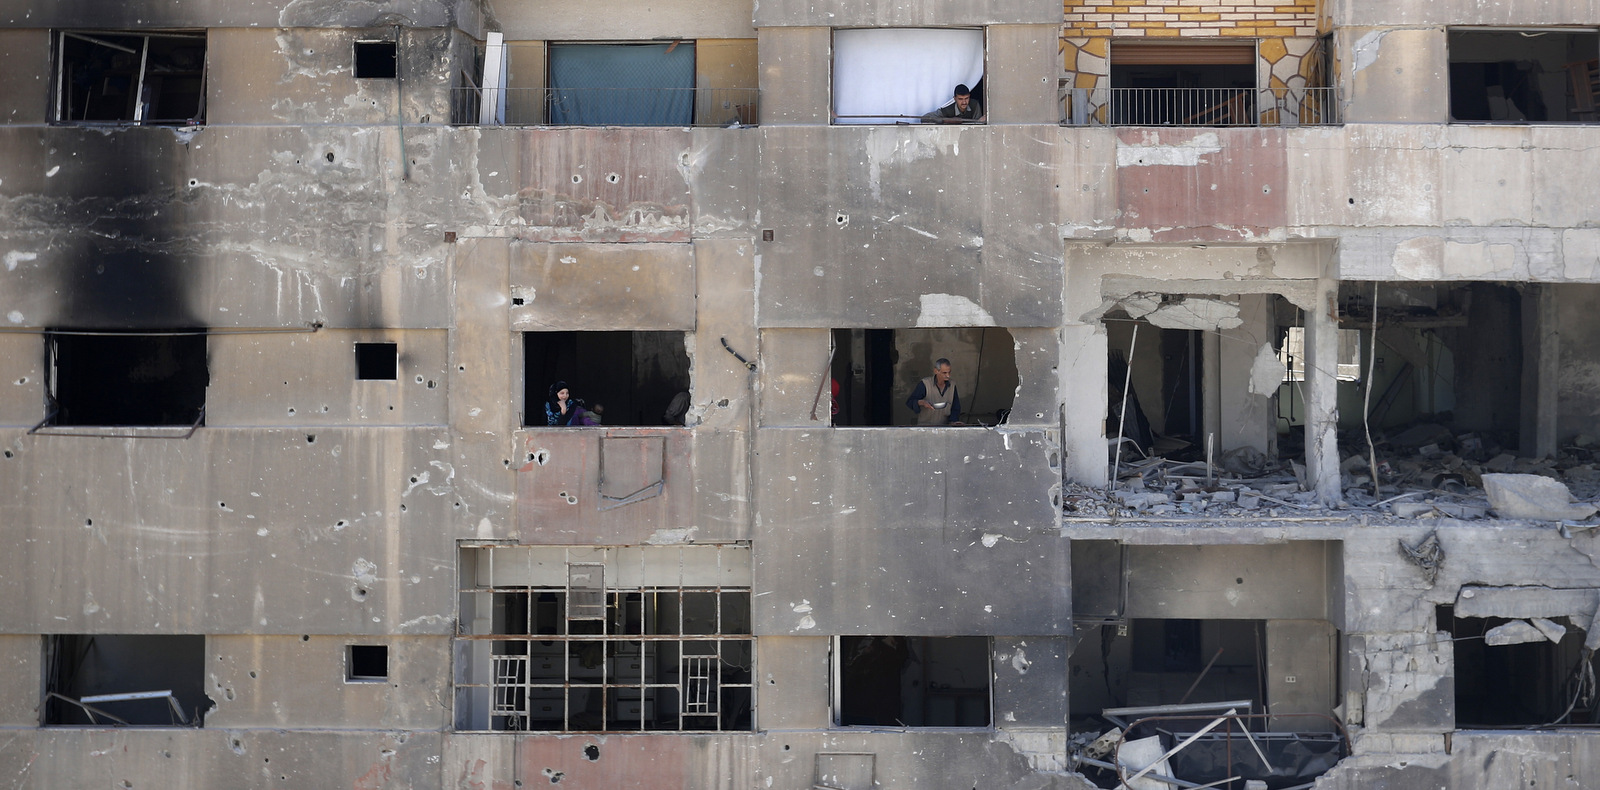 In this Monday, April 16, 2018 photo, people look out of their damage apartment windows just meters away from where the alleged chemical weapons attack occurred in the town of Douma, the site of a suspected chemical weapons attack, near Damascus, Syria. The survivors blamed the attack on the Army of Islam, the powerful rebel group that controlled the town before it was taken over by Syrian government forces this week, although they did not offer evidence to back up their claims.(AP/Hassan Ammar)